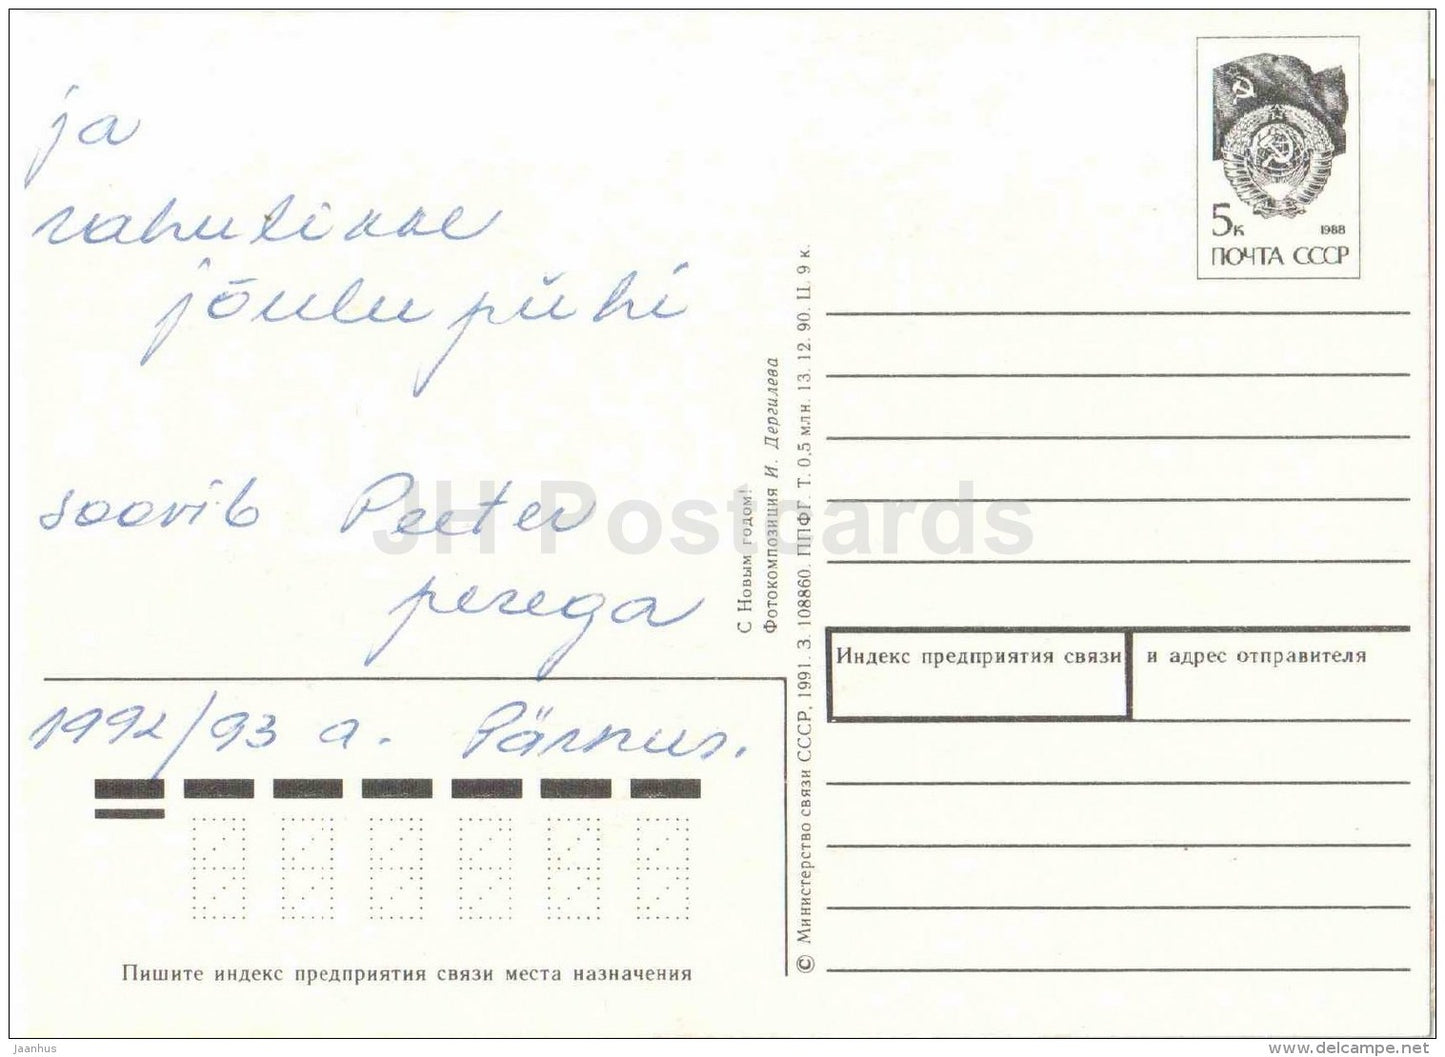 New Year Greeting card - decorations - 1 - postal stationery - 1991 - Estonia USSR - used - JH Postcards